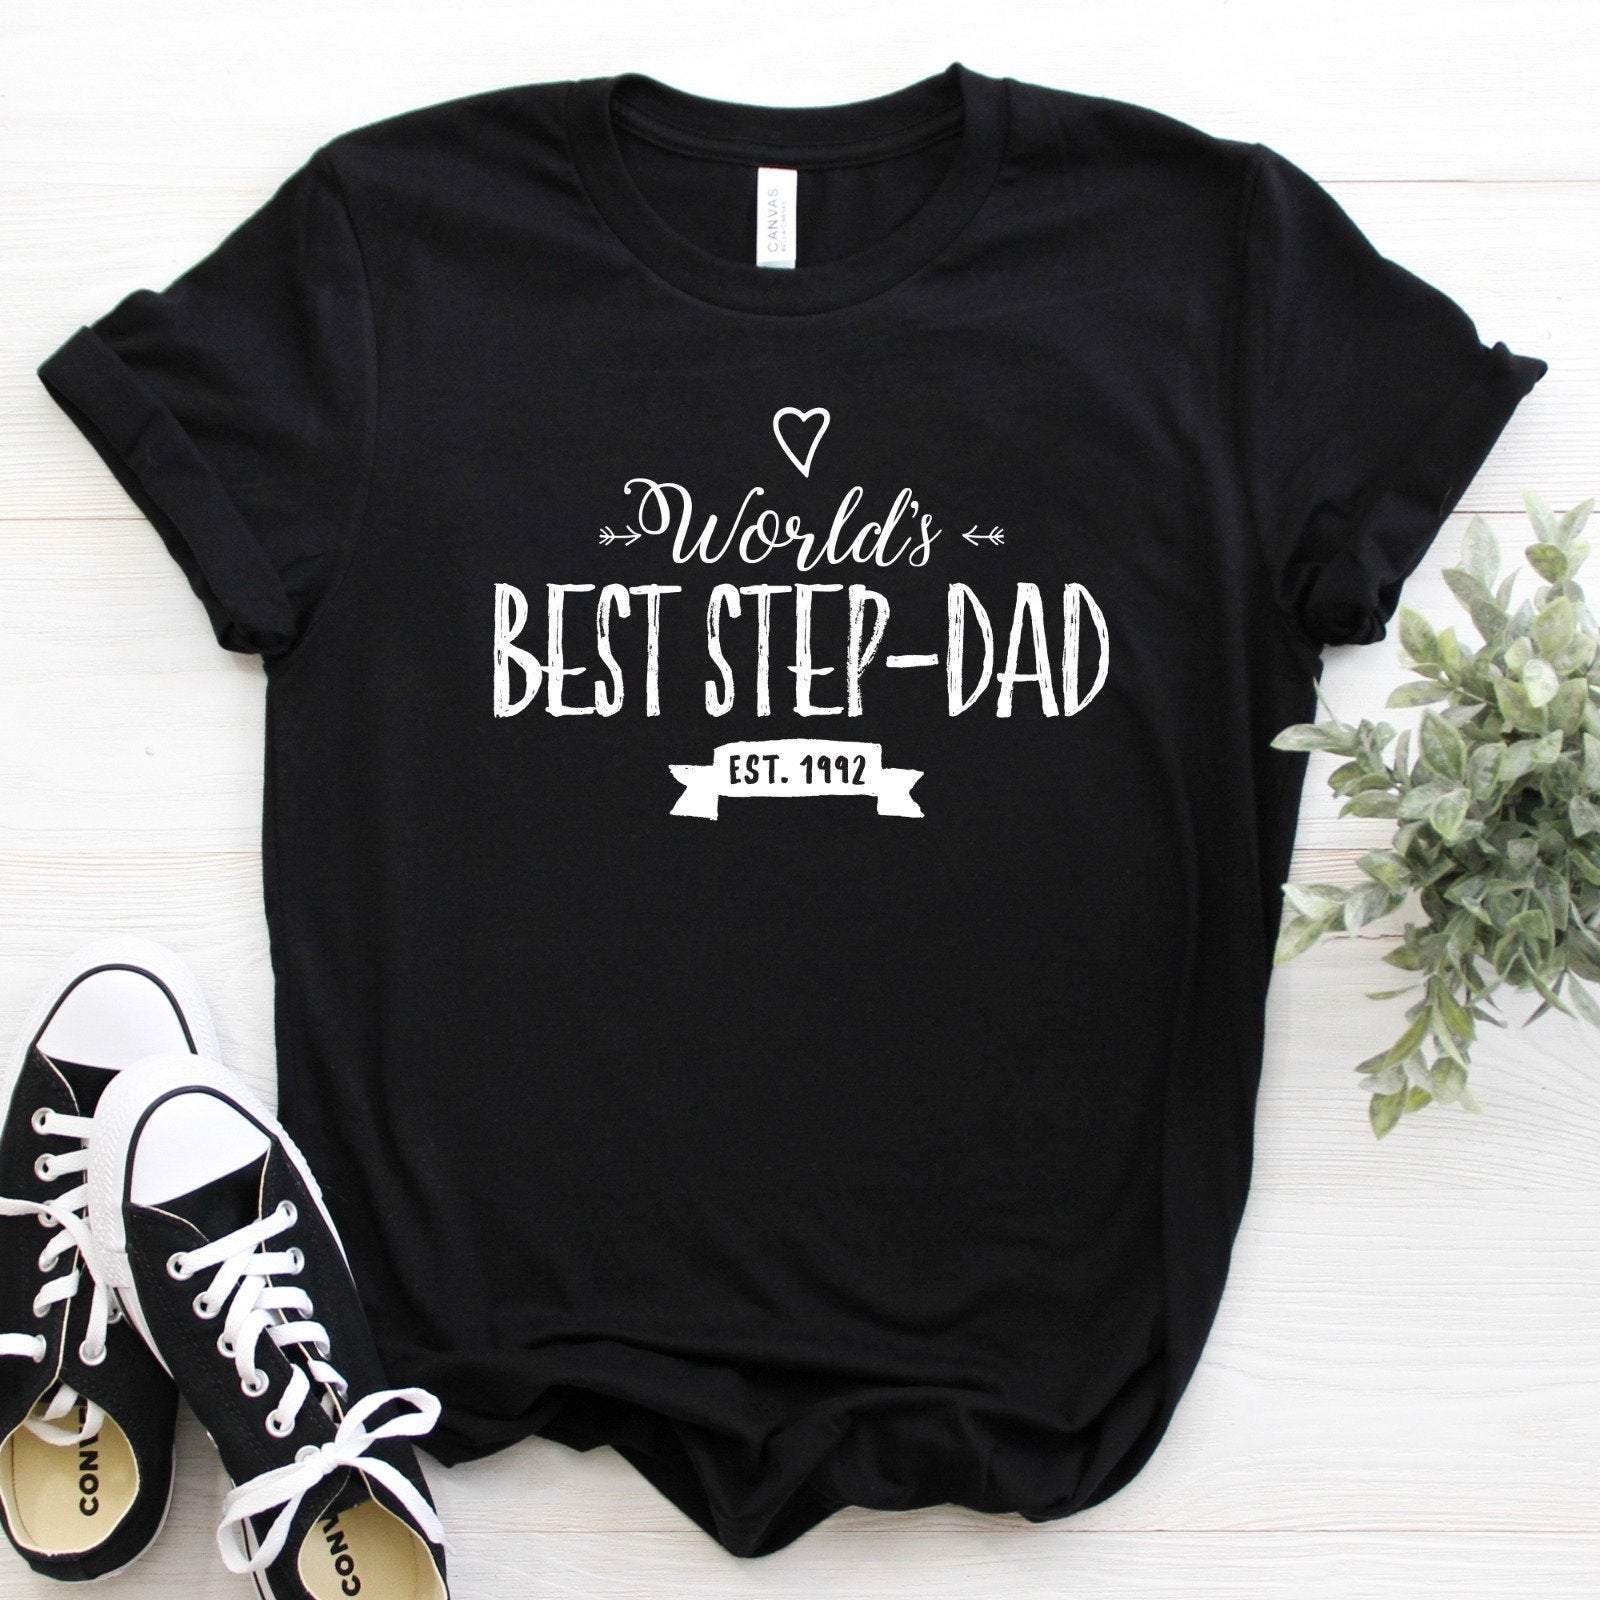 World'S Best Step-Dad T-Shirt With Est. Date, Father's Day Gift, Gift For Step Dad